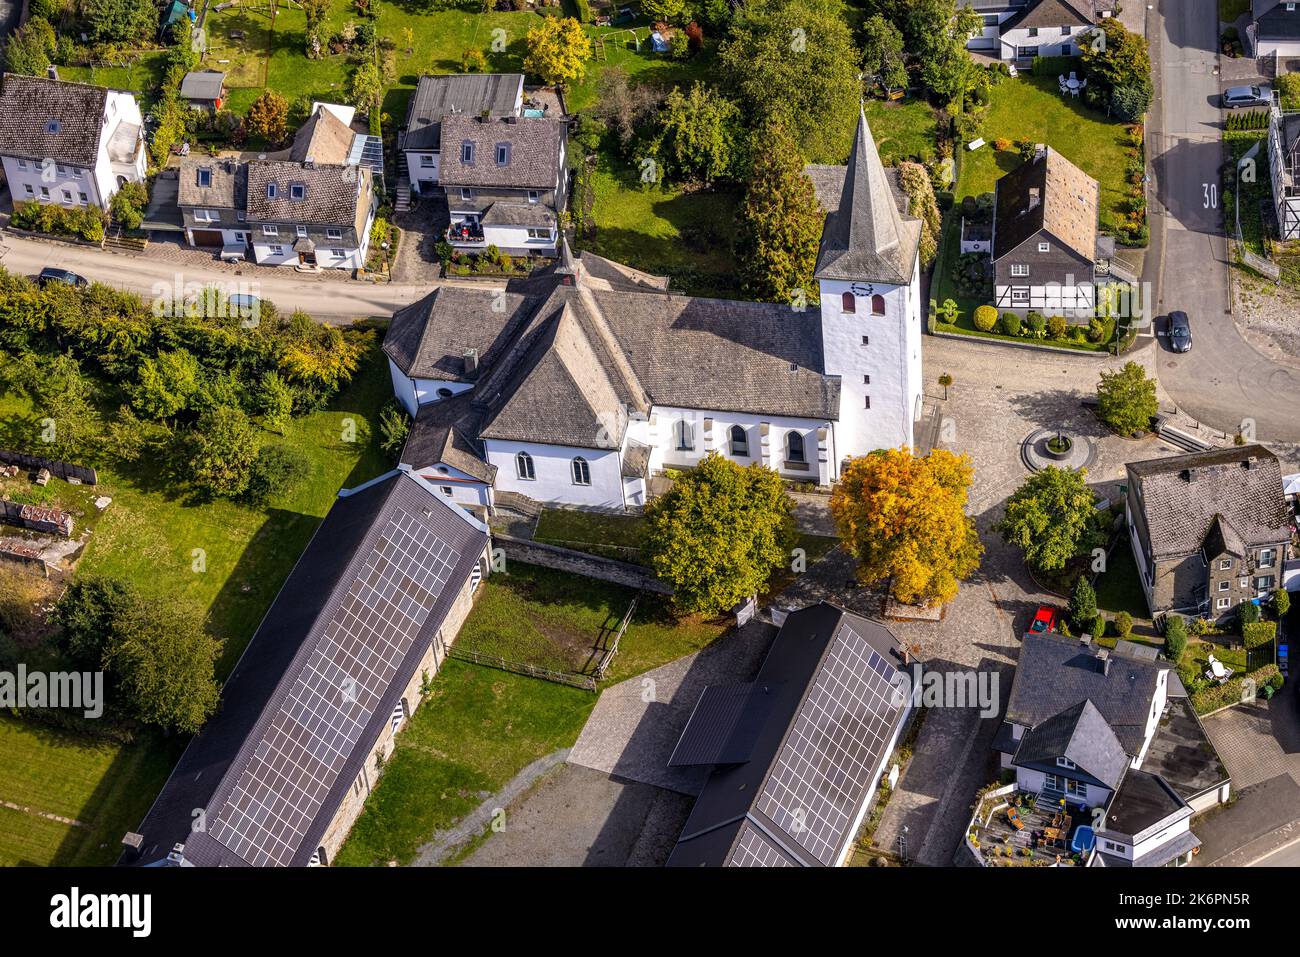 Aerial view, St. Joseph church, Ostwig, Bestwig, Ruhr area, North Rhine-Westphalia, Germany, Andachtstaette, DE, Europe, Faith Community, Place of wor Stock Photo